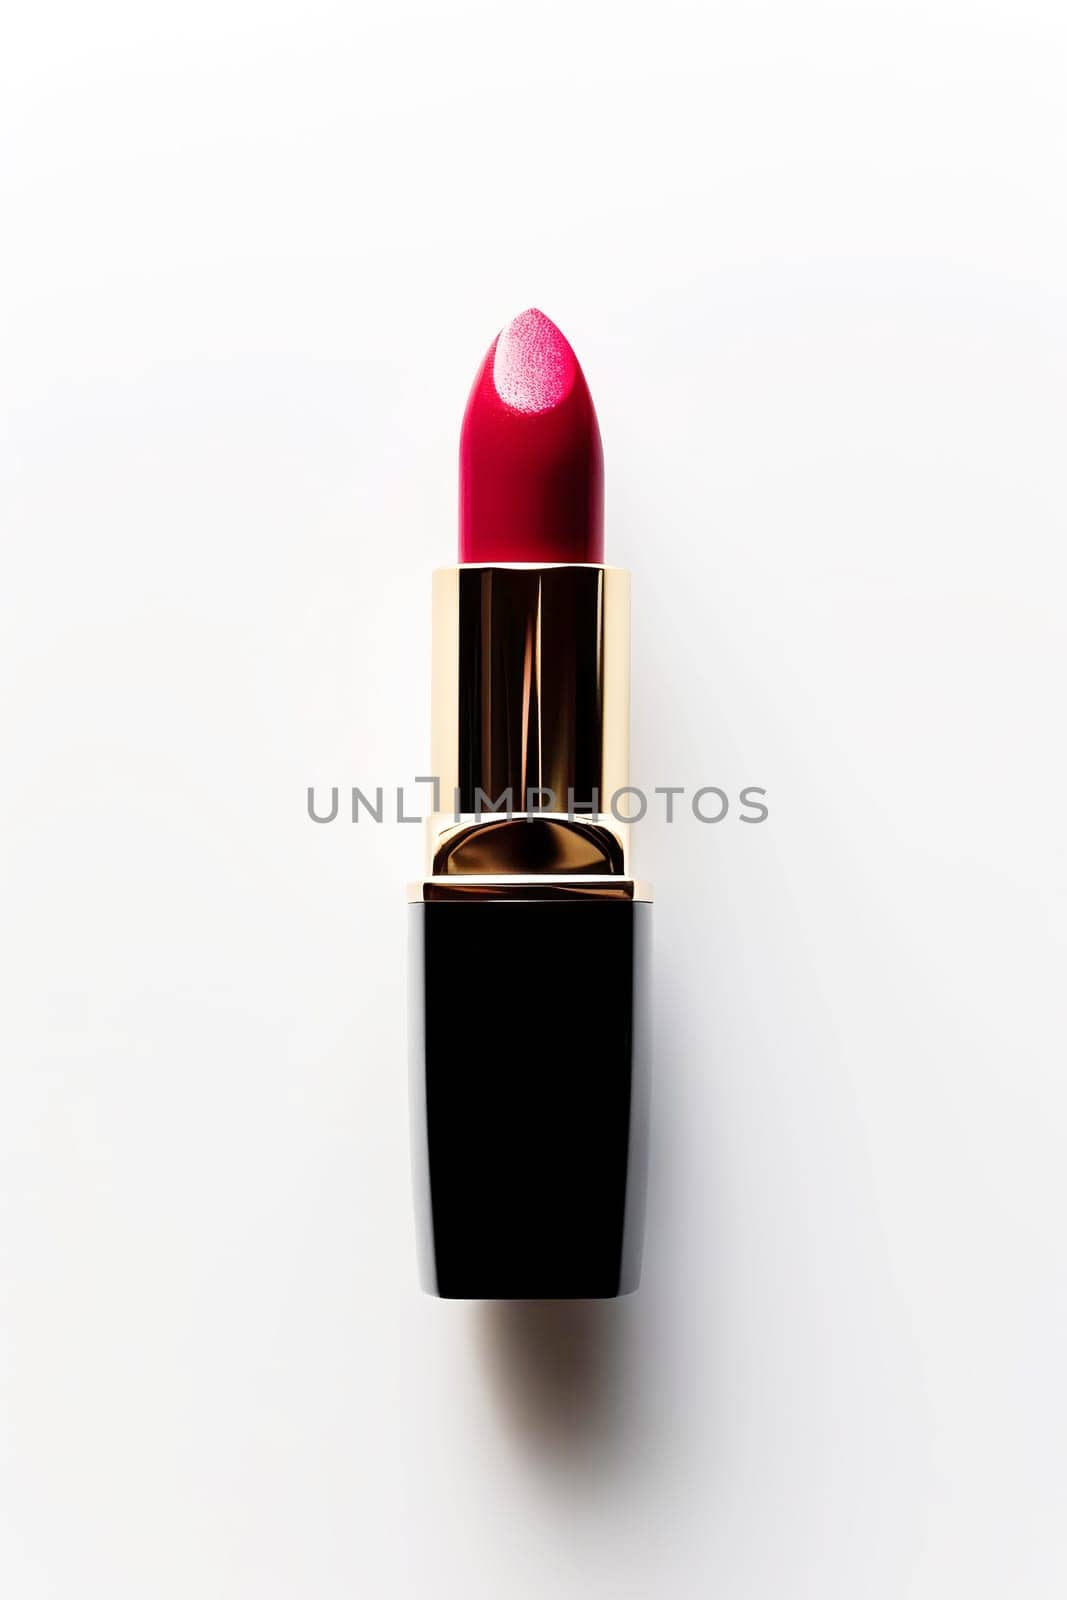 Tube of red lipstick close-up on a white background. Decorative cosmetics. AI generated.